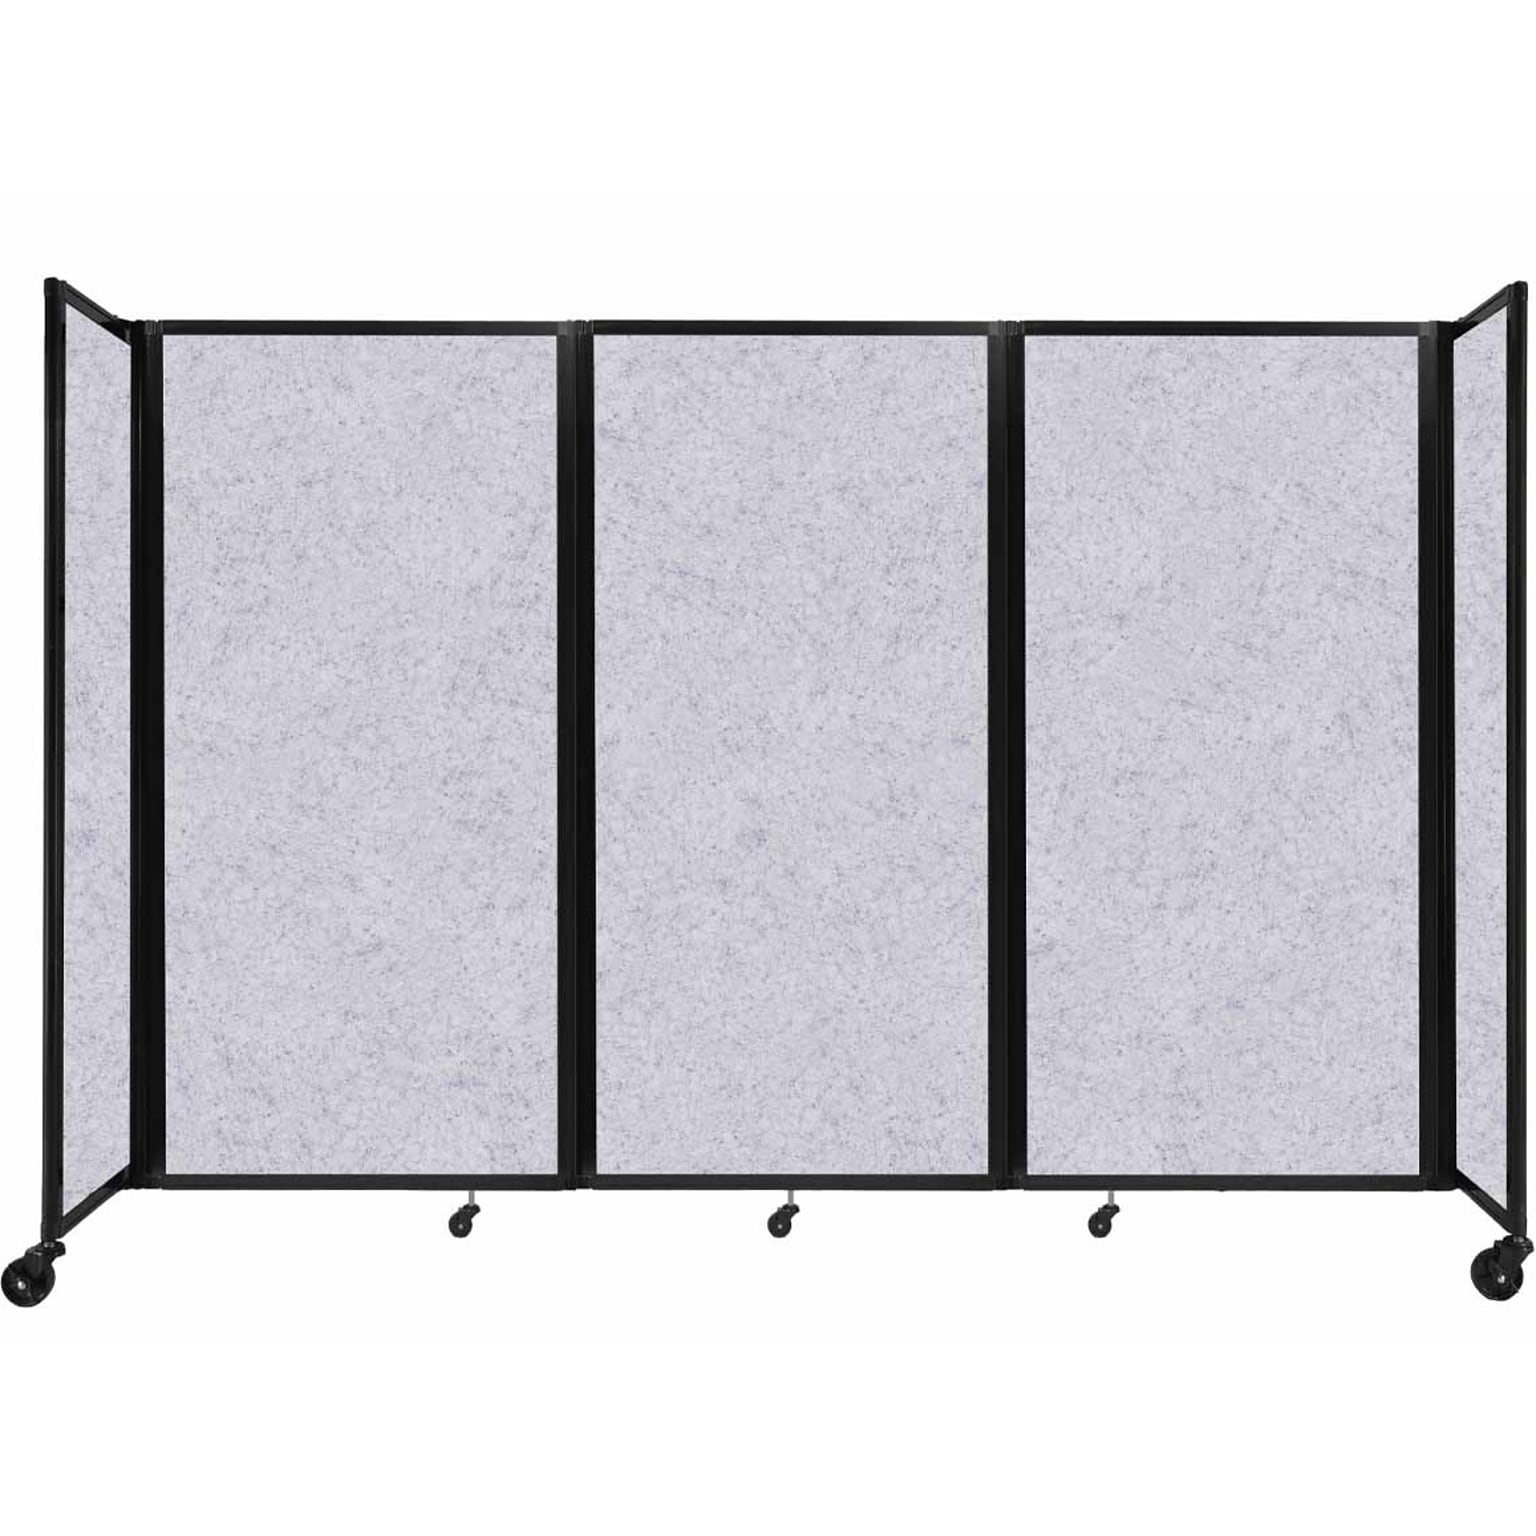 Versare The Room Divider 360 Freestanding Folding Portable Partition, 72H x 102W, Marble Gray SoundSorb Fabric (1932001)